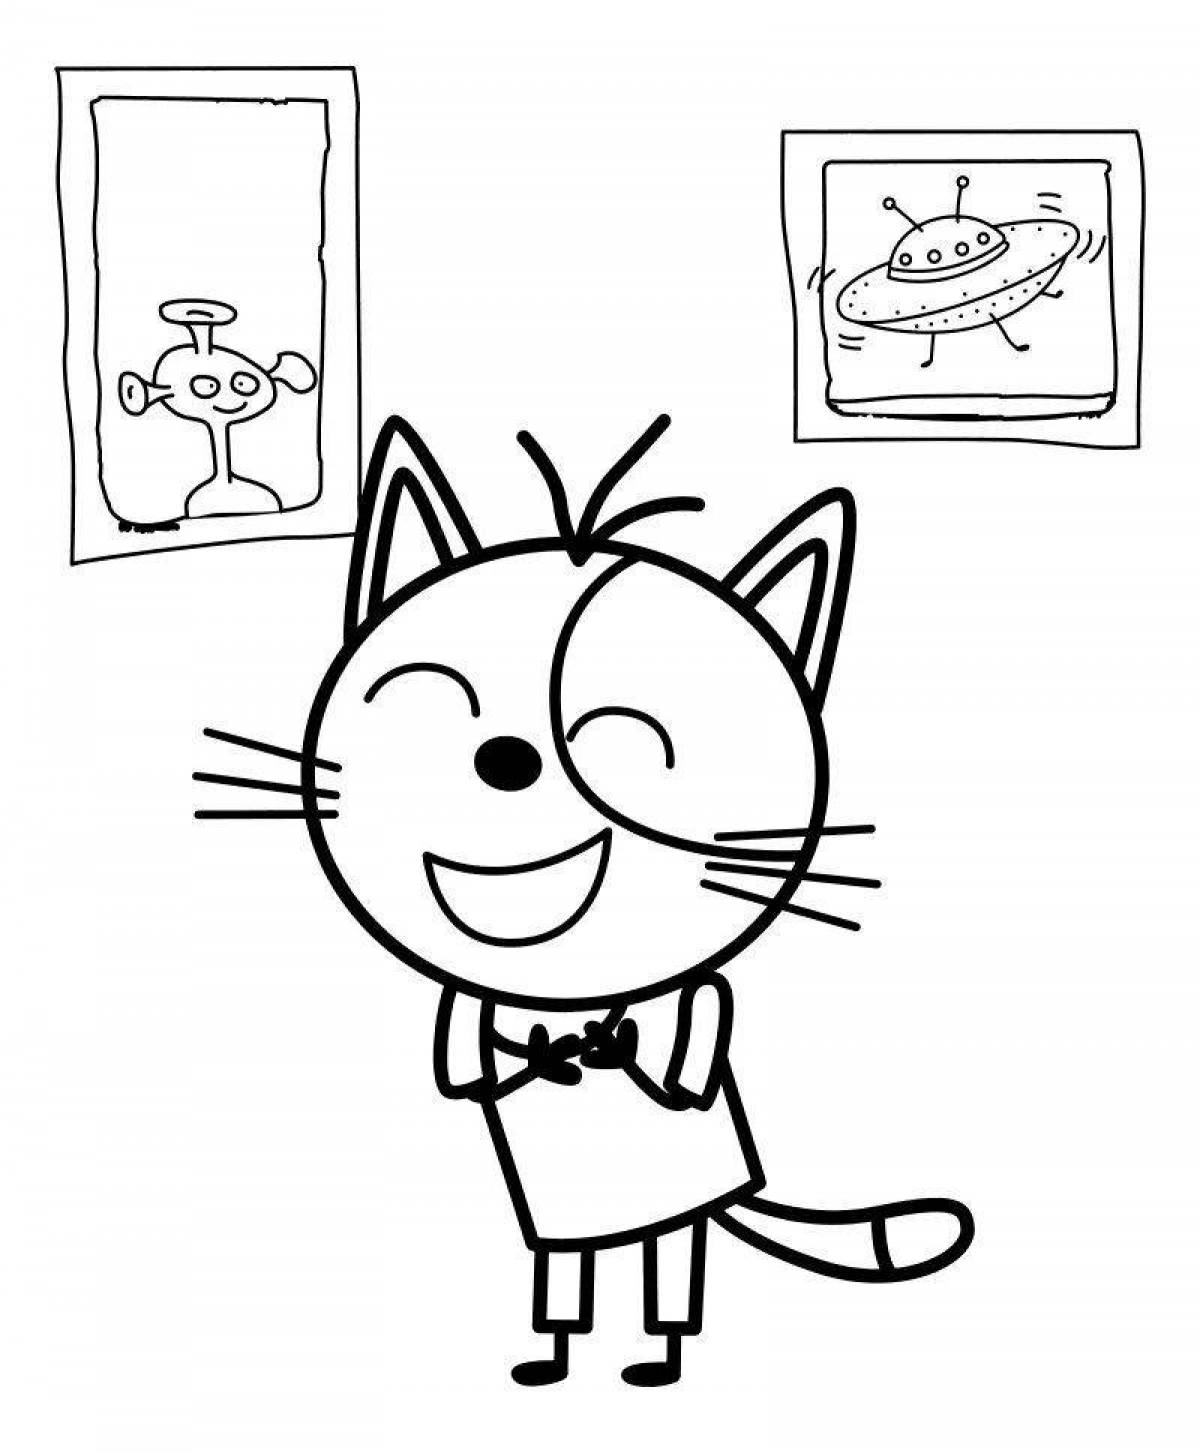 Tempting chasing three cats coloring page